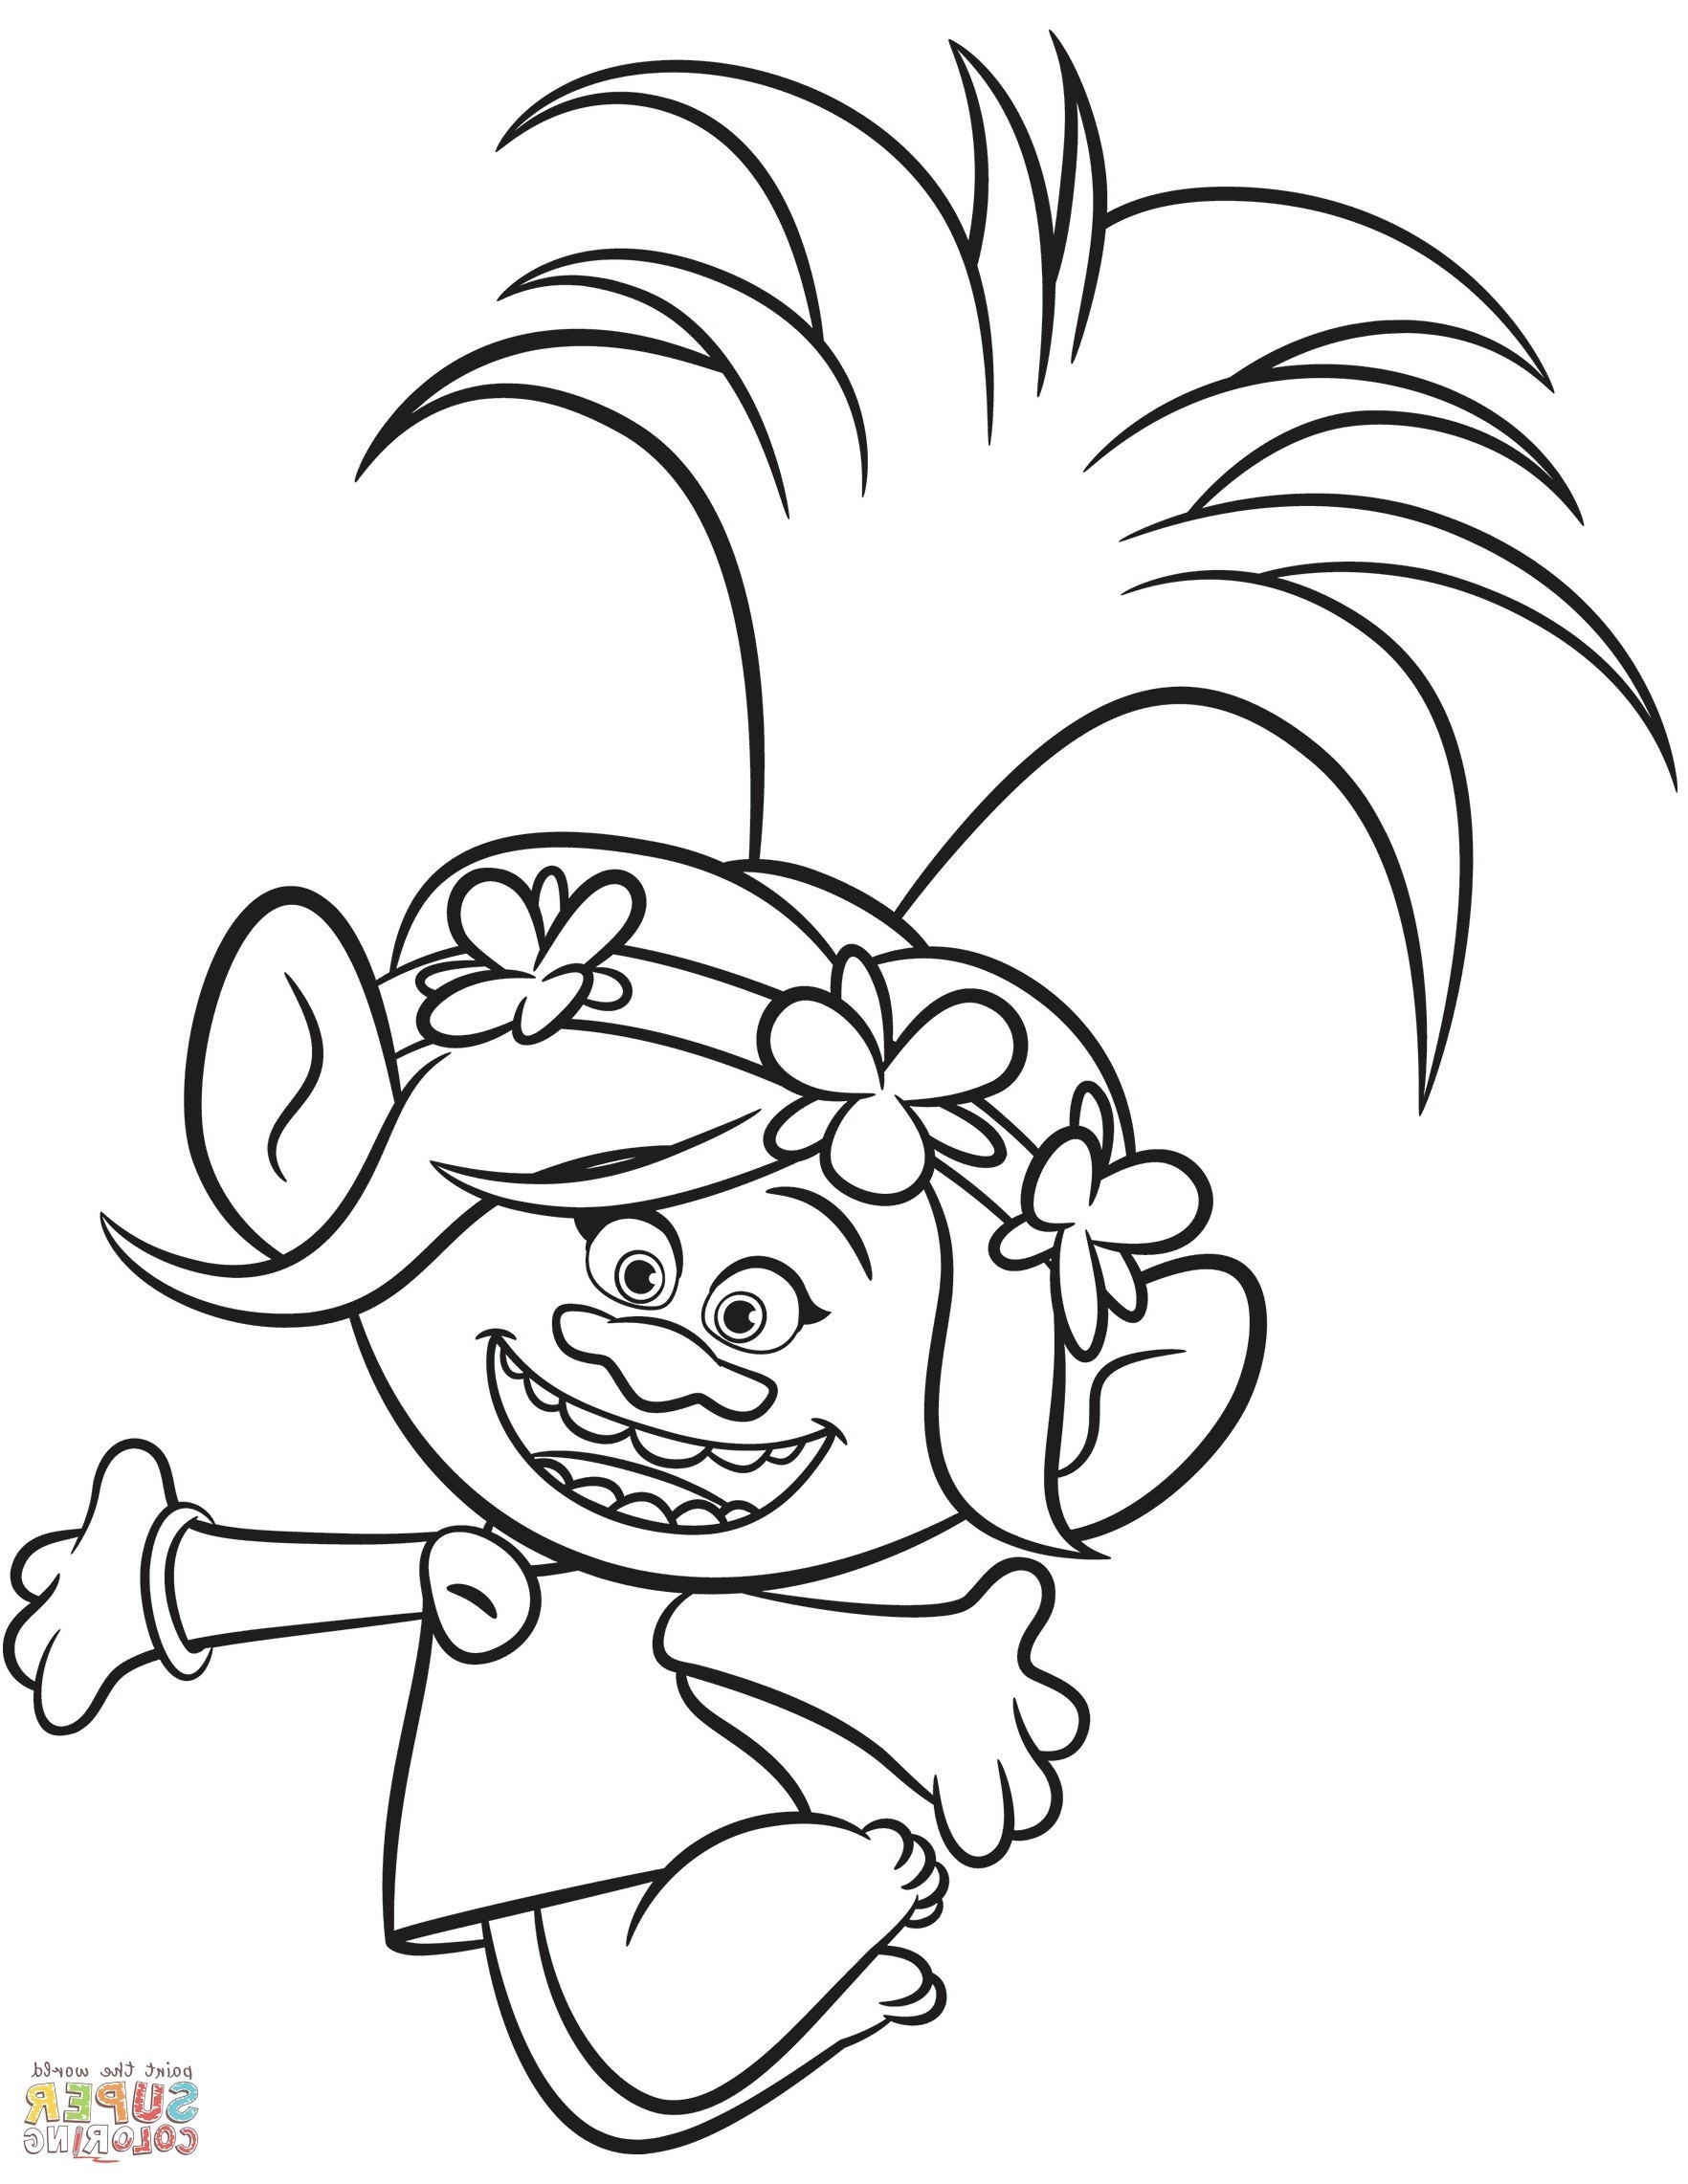 Trolls Coloring Pages Best Trolls Coloring Pages Valid Trolls Poppy Coloring Pages Bravica